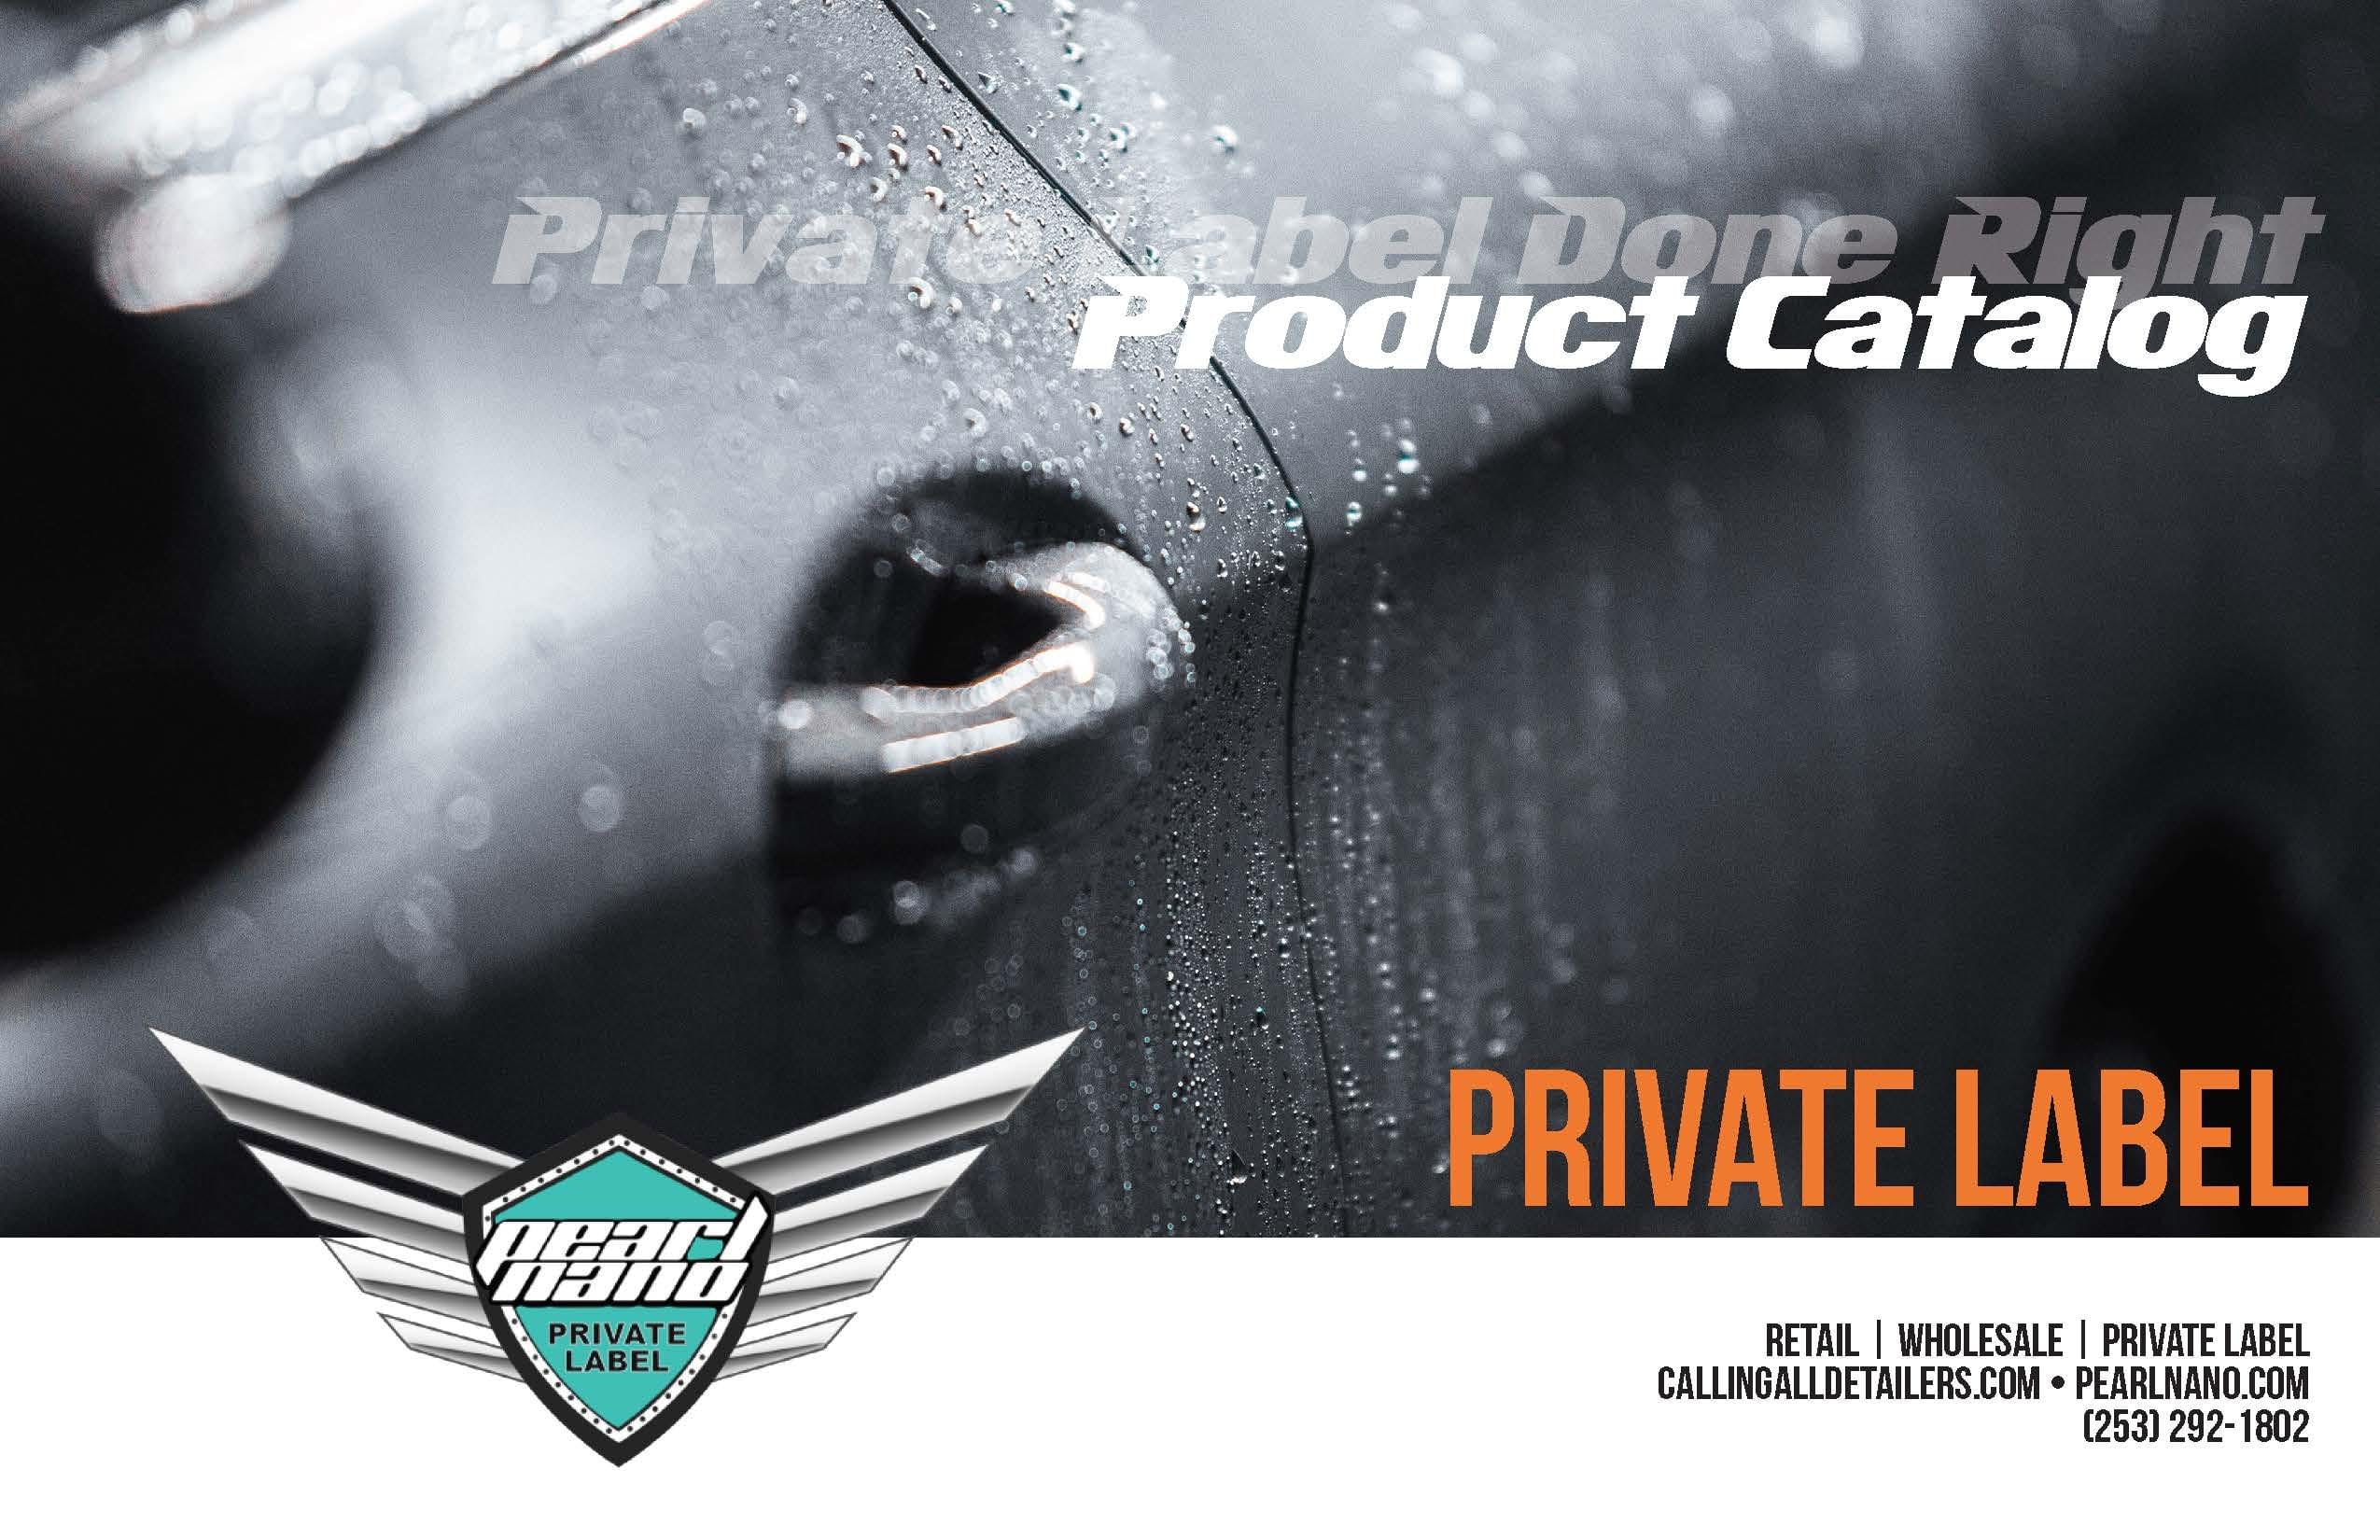 Car care product label need updated!, Product label contest